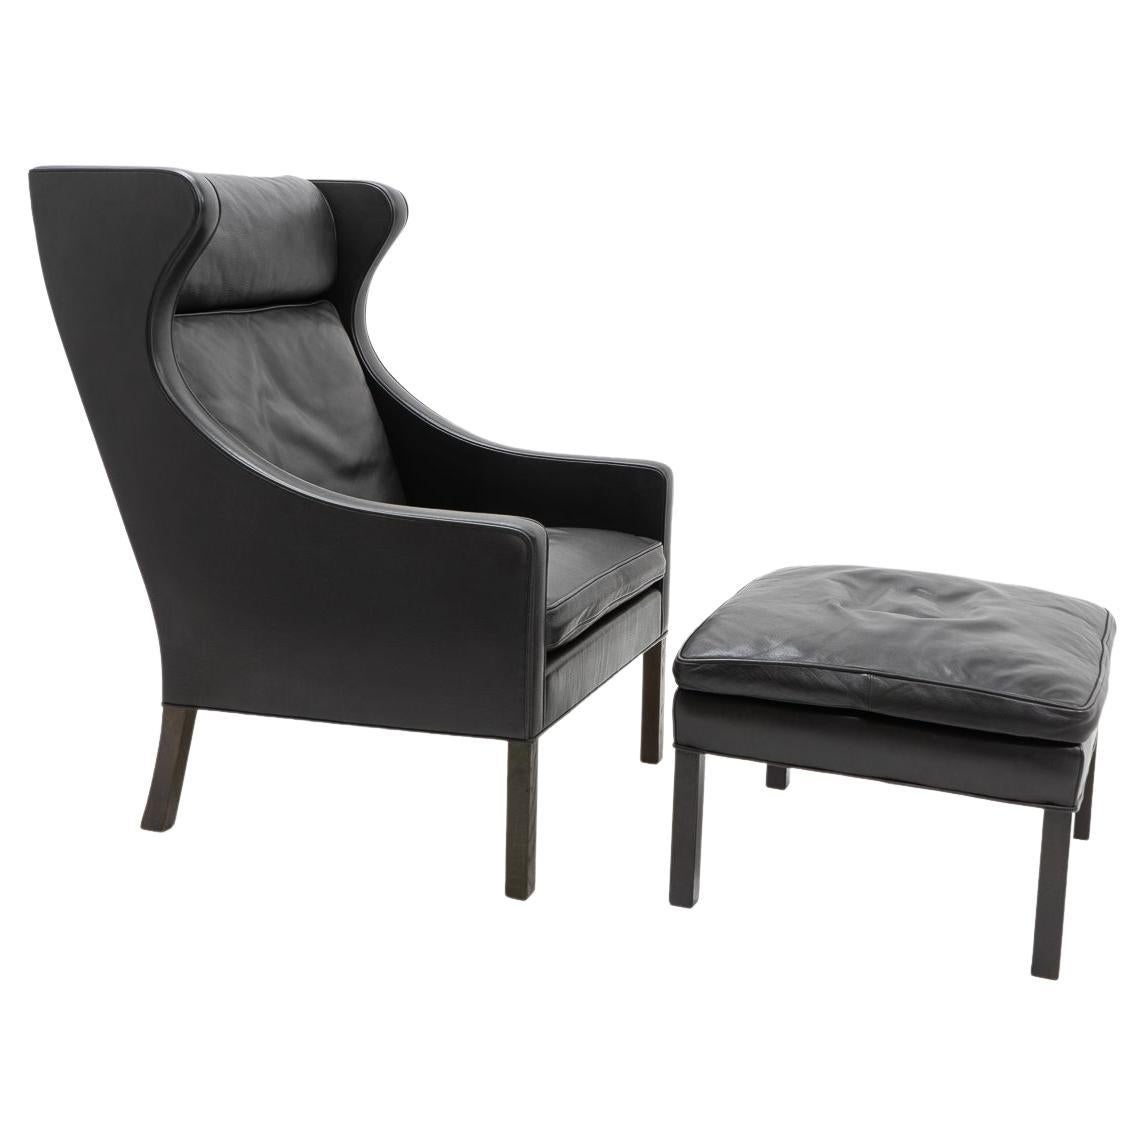 Design Classic Black Leather Wingchair and Footstool by Borge Mogensen, 1960s For Sale